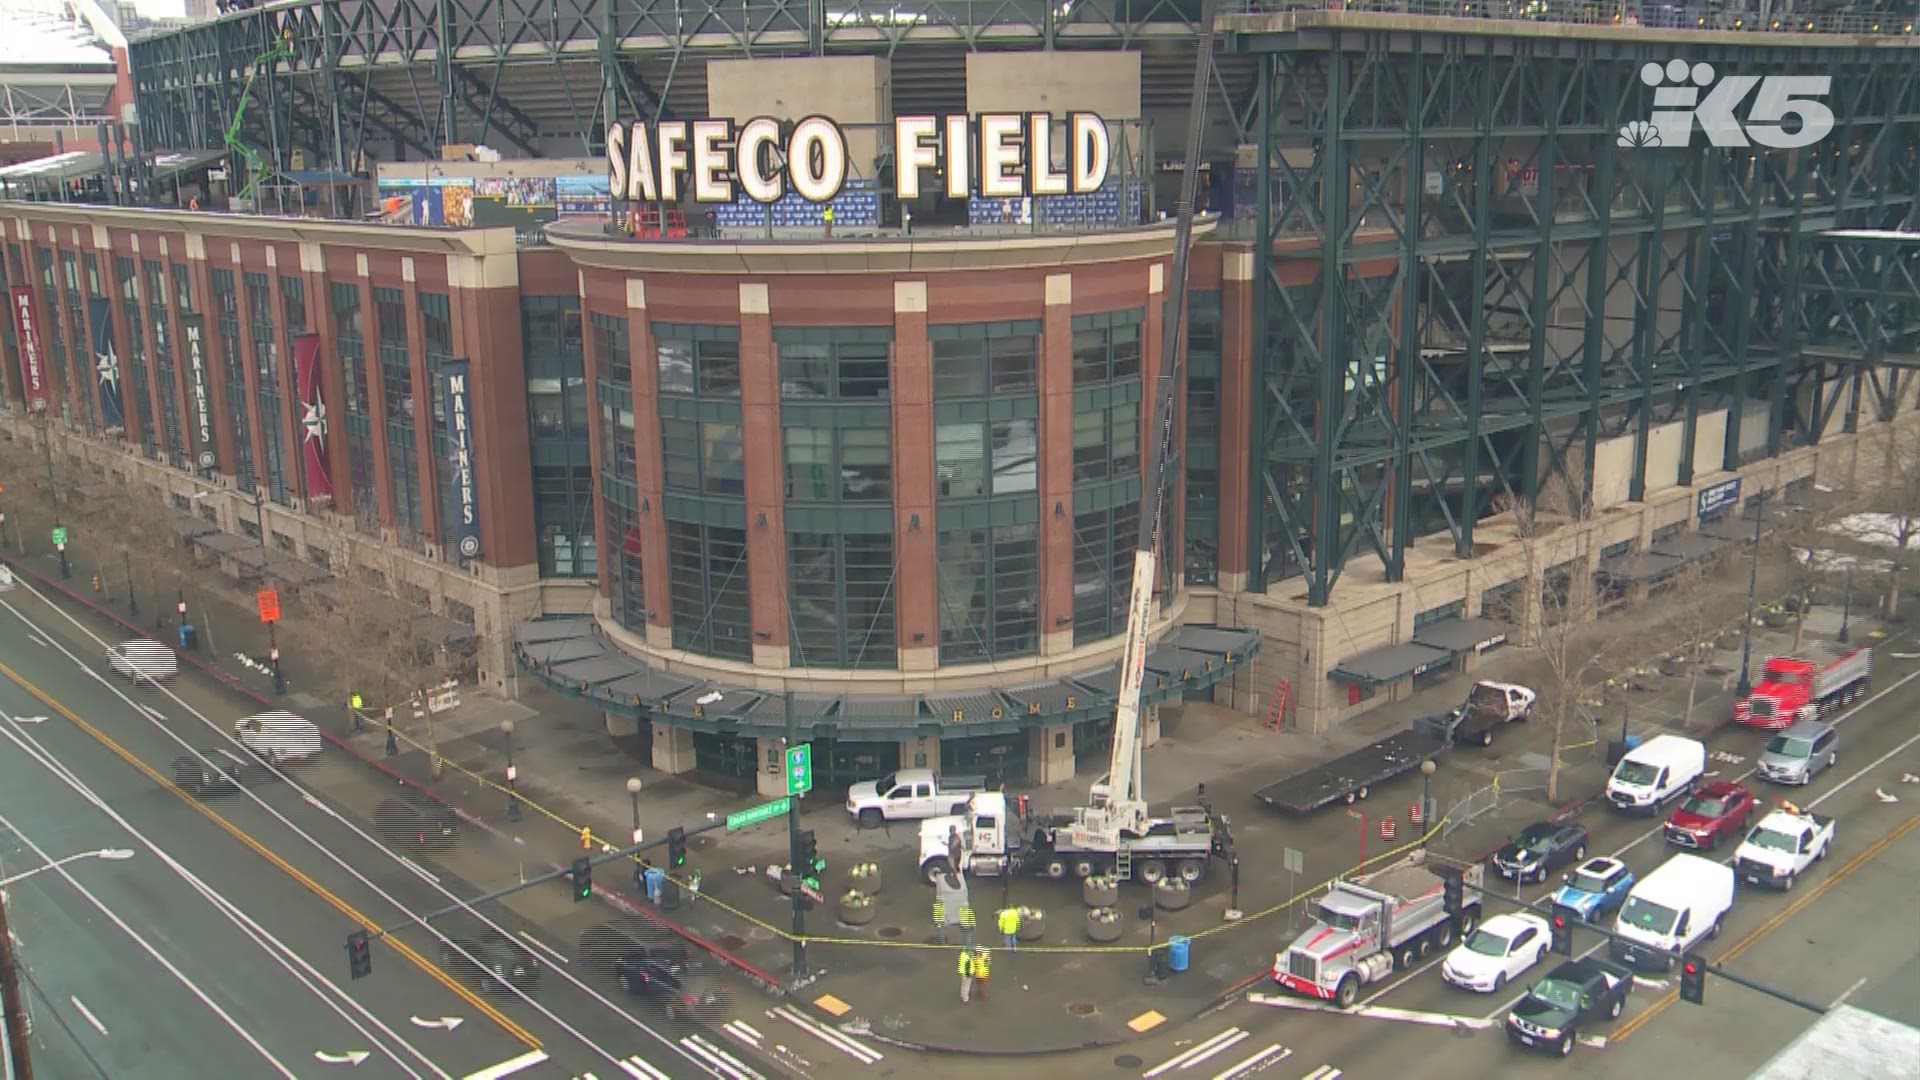 KUOW - Seattle on Safeco Field name change: Meh